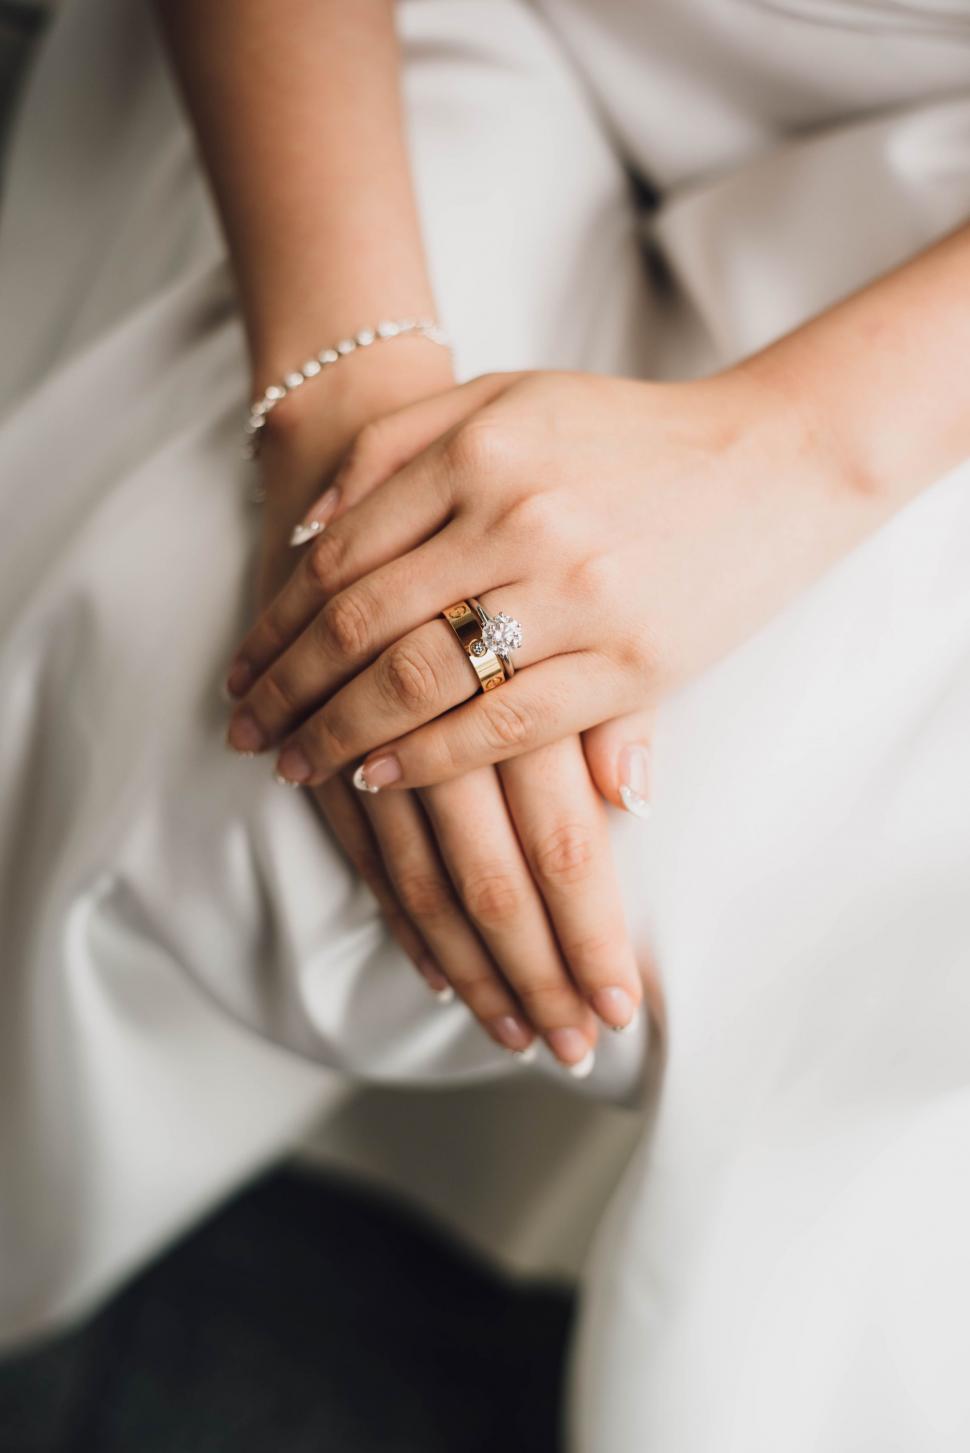 Free Image of Close-Up of Person Wearing Wedding Ring 